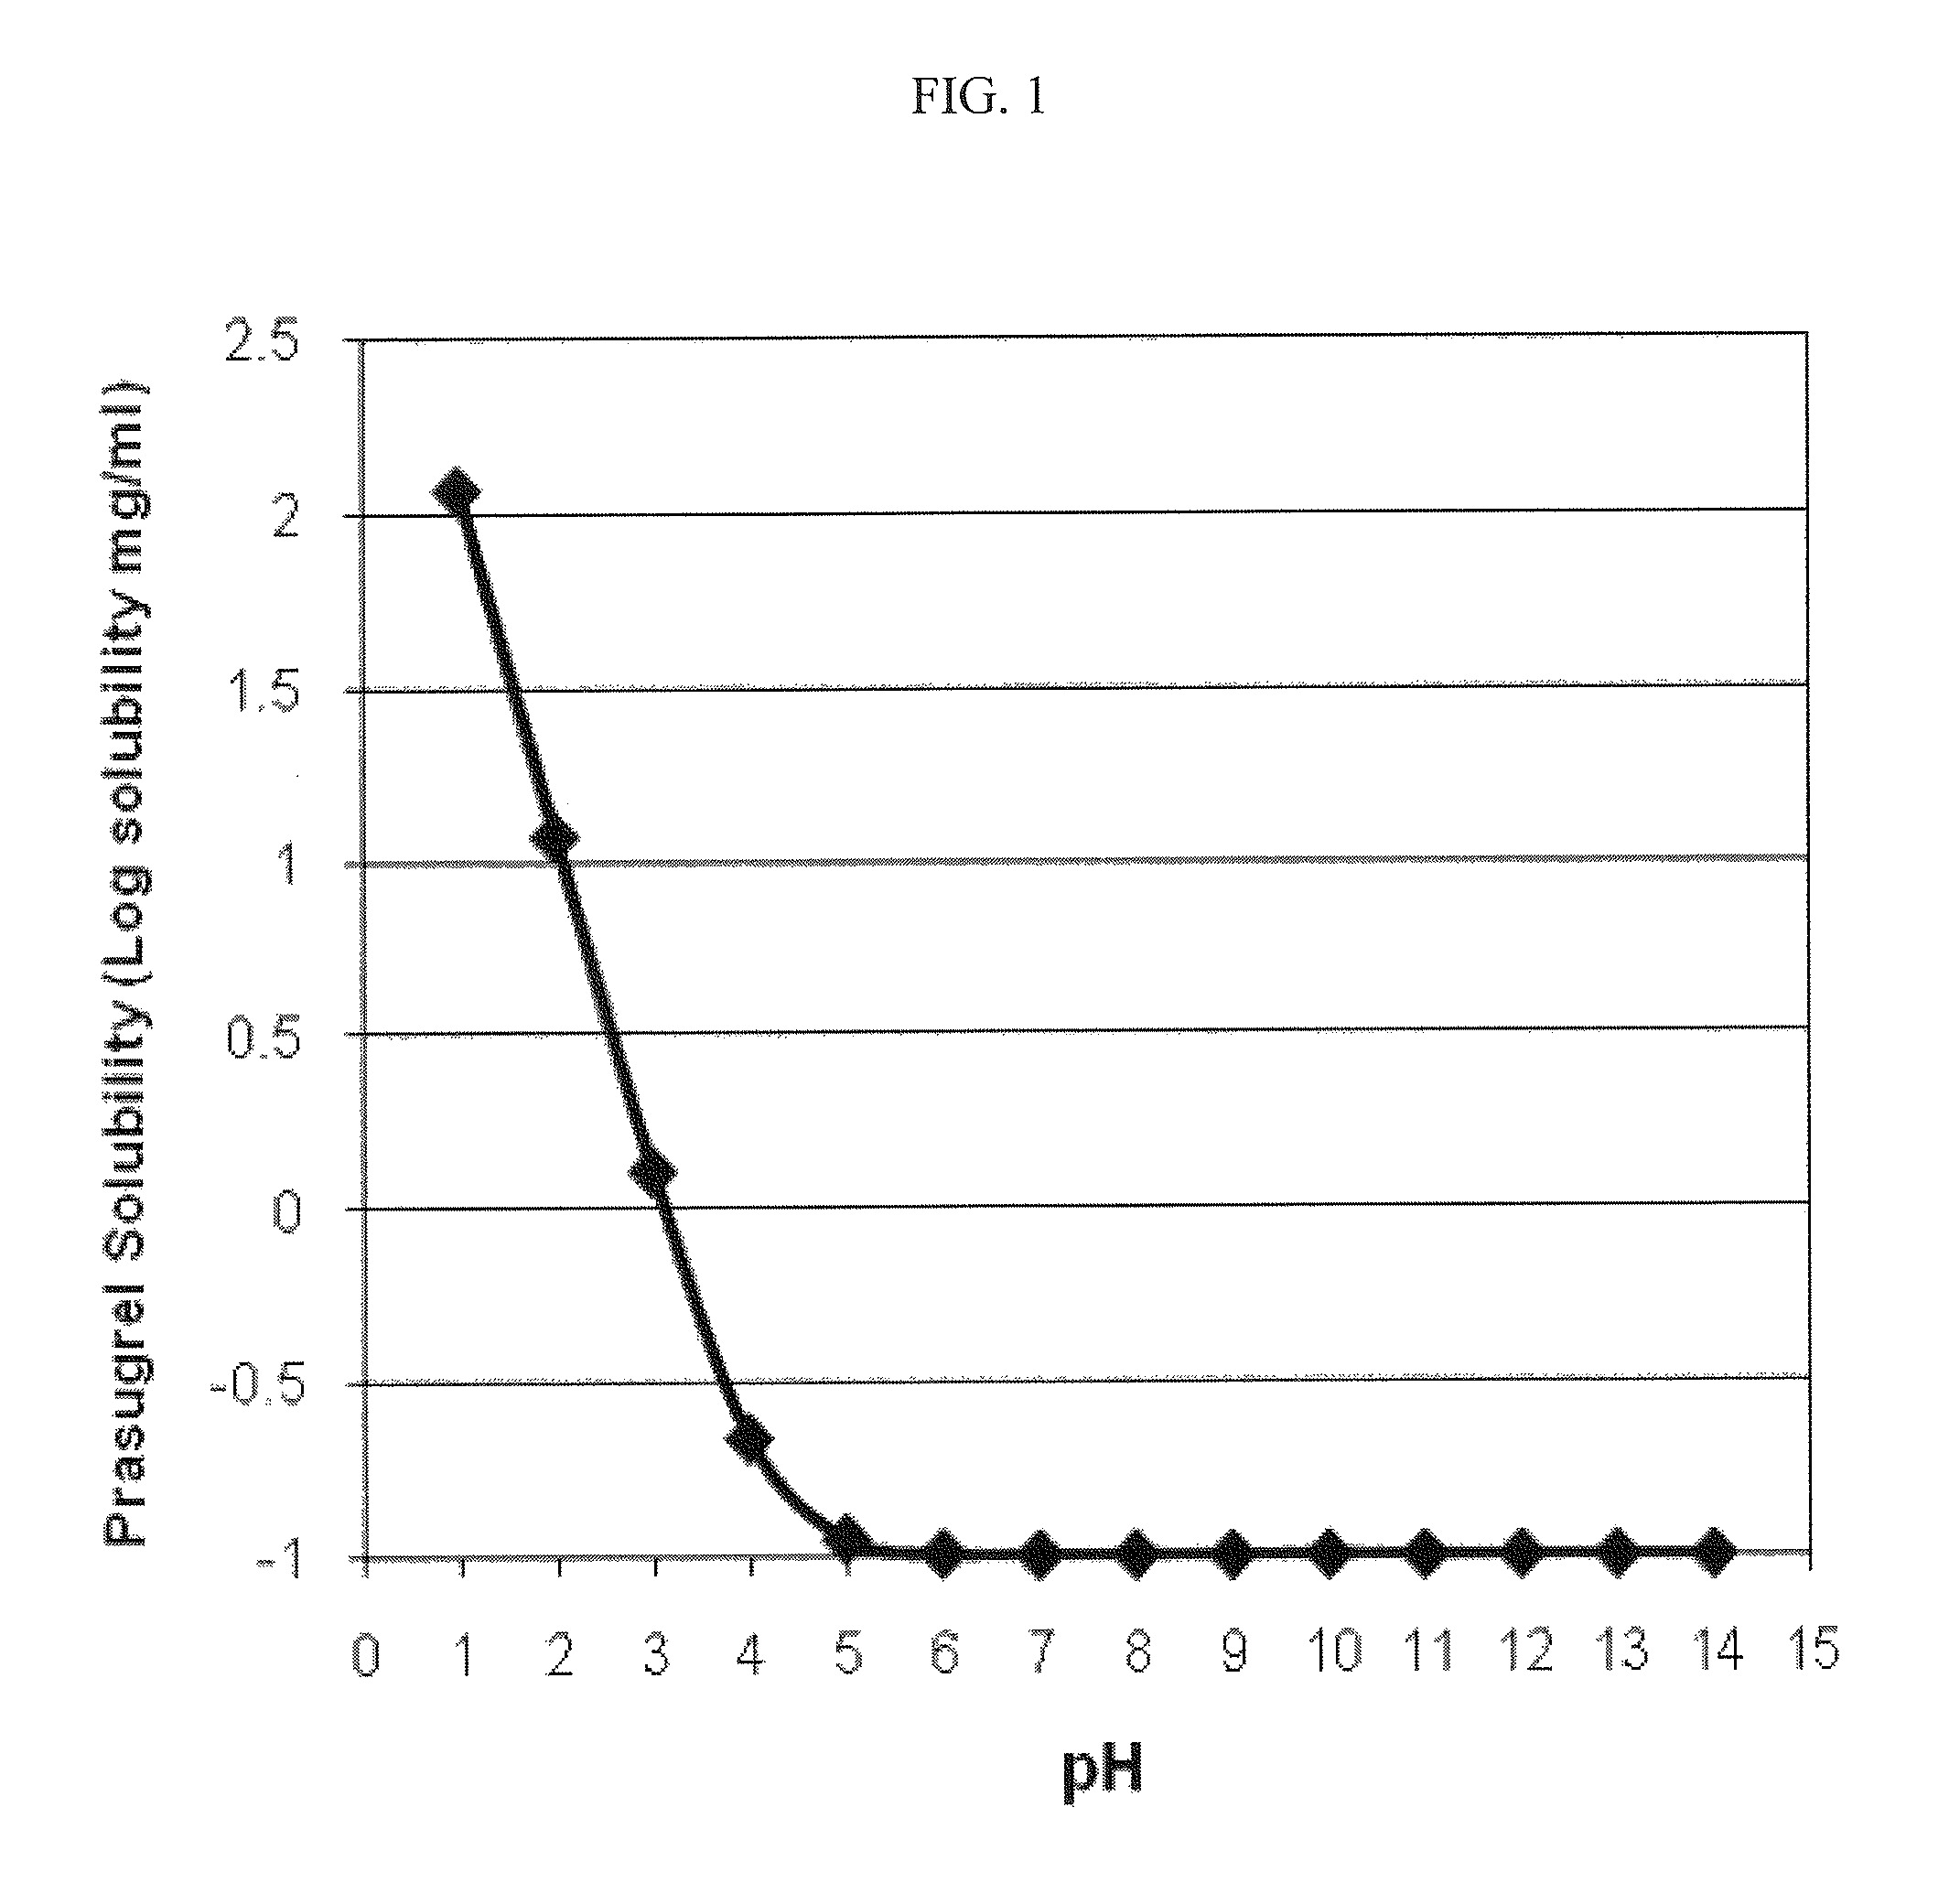 Pharmaceutical compositions comprising prasugrel and cyclodextrin derivatives and methods of making and using the same